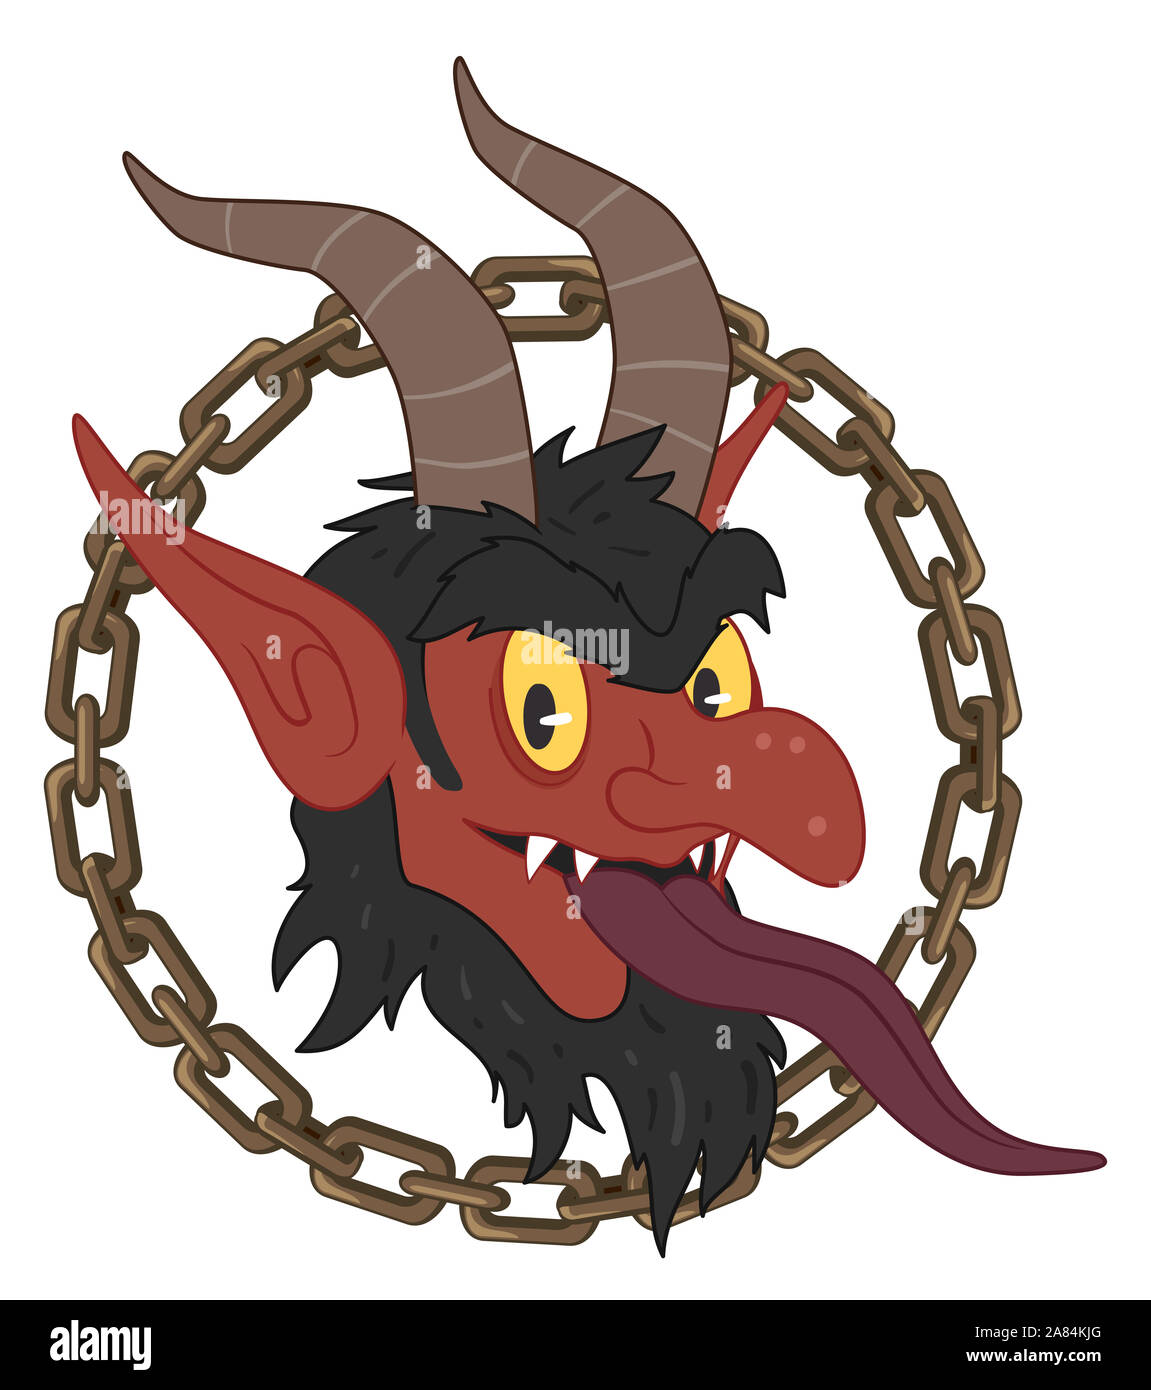 Illustration of the Face of Krampus of Austria with Horn and Long Tongue with Chains Around It Stock Photo